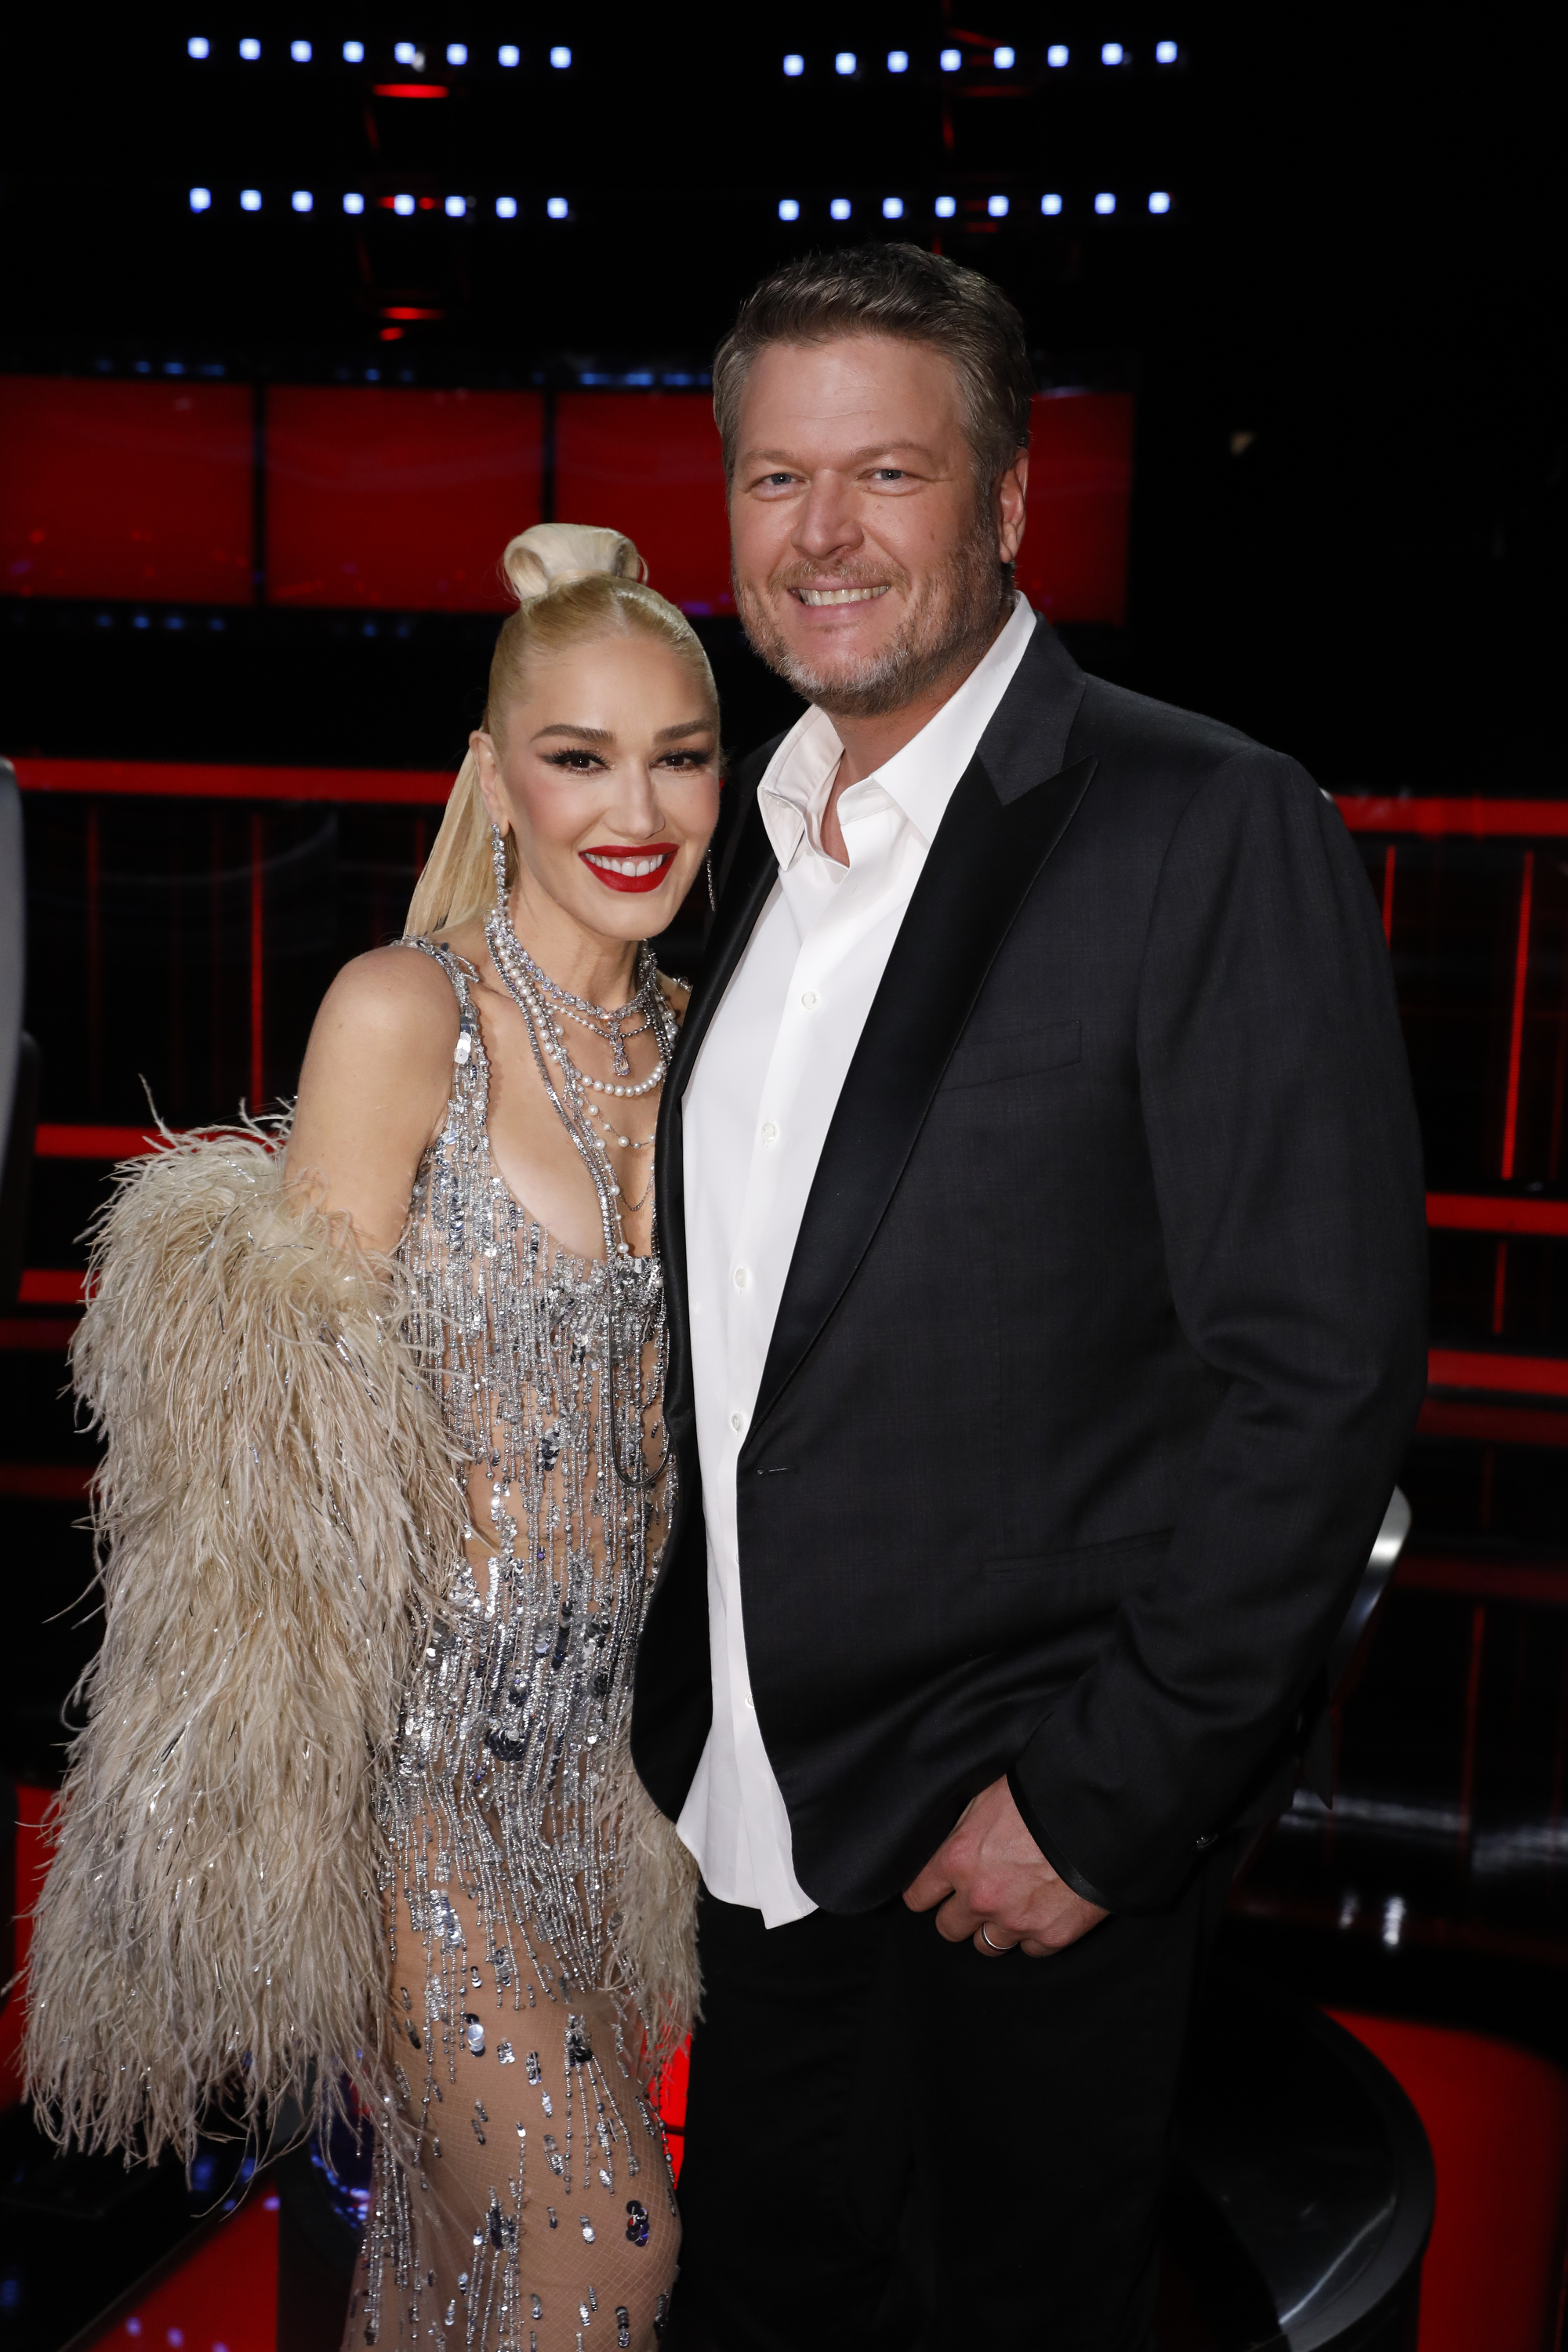 Rumors have swirled that Gwen and Blake's marriage might be in trouble